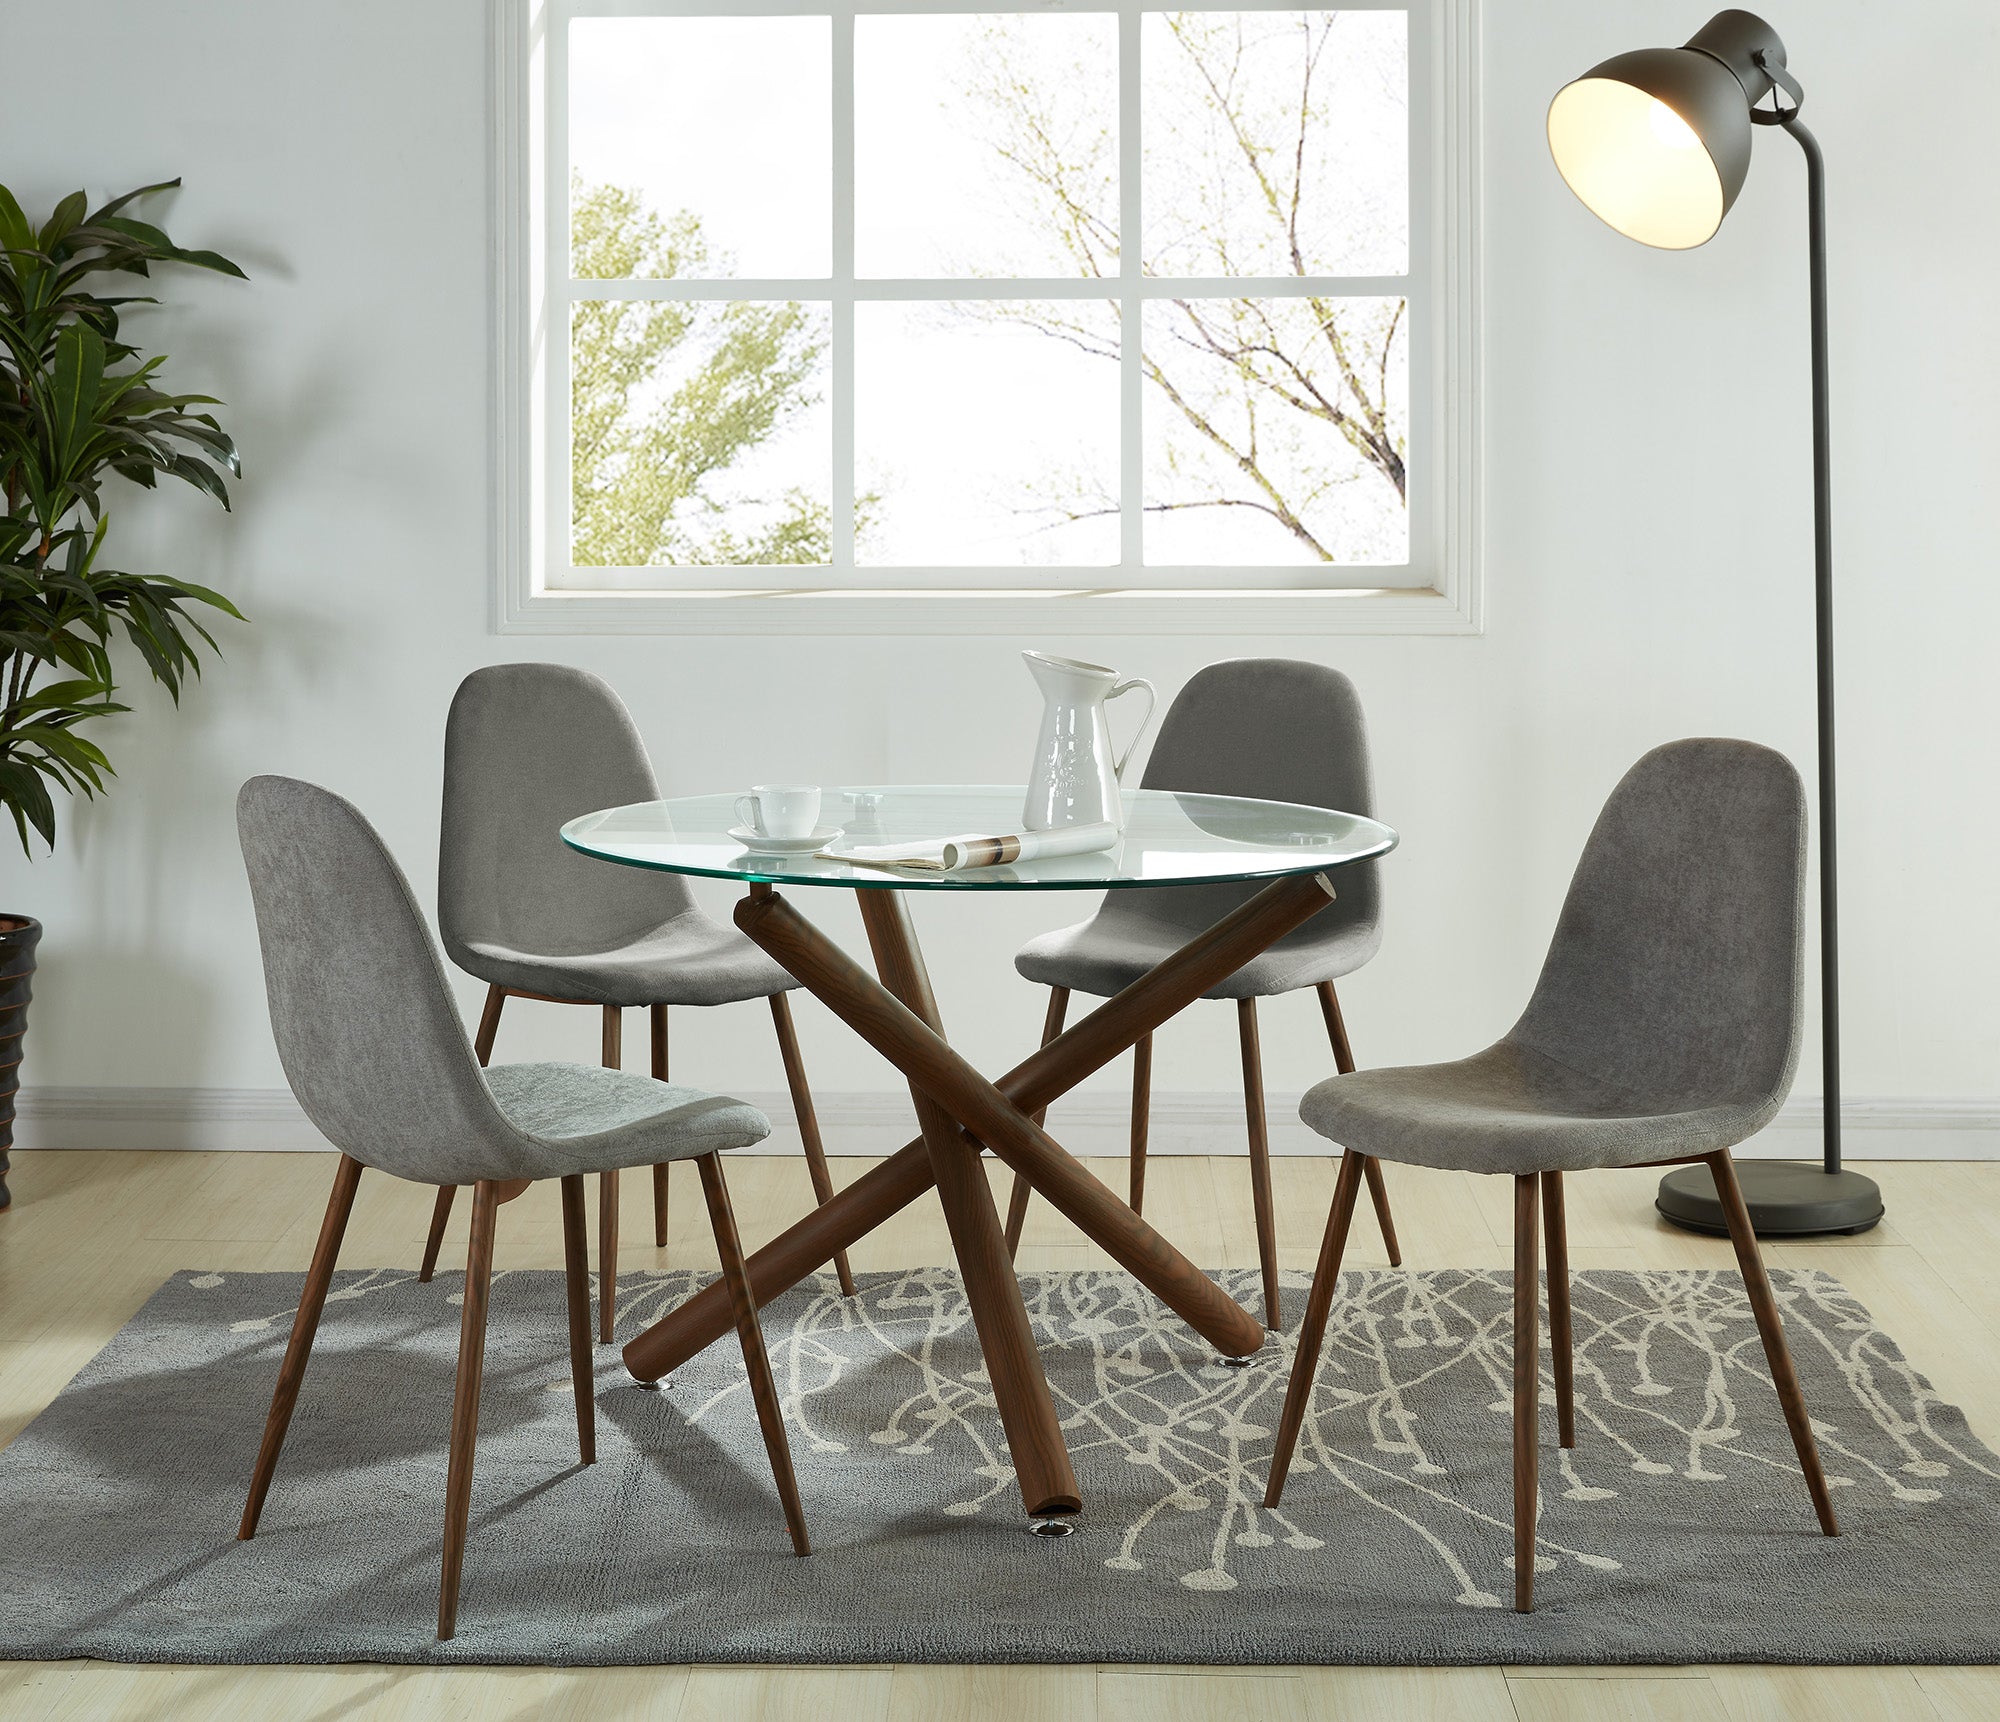 Rocca/Lyna 5pc Dining Set in Walnut with Grey Chair 207-264/250GY